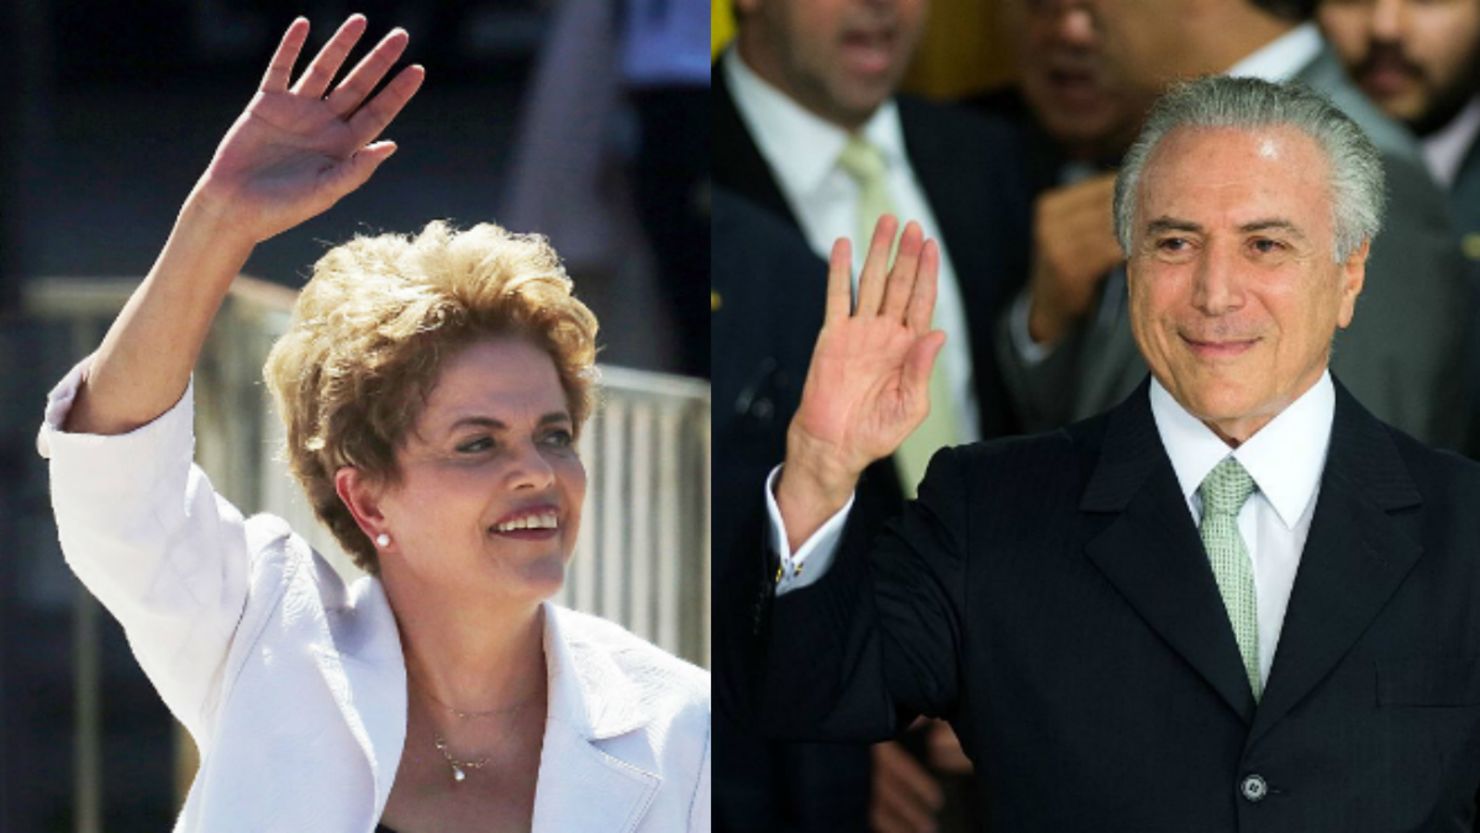 Brazil President Dilma Rousseff and acting President Michel Temer. A newly appointed member of Temer's Cabinet will take a leave of absence.